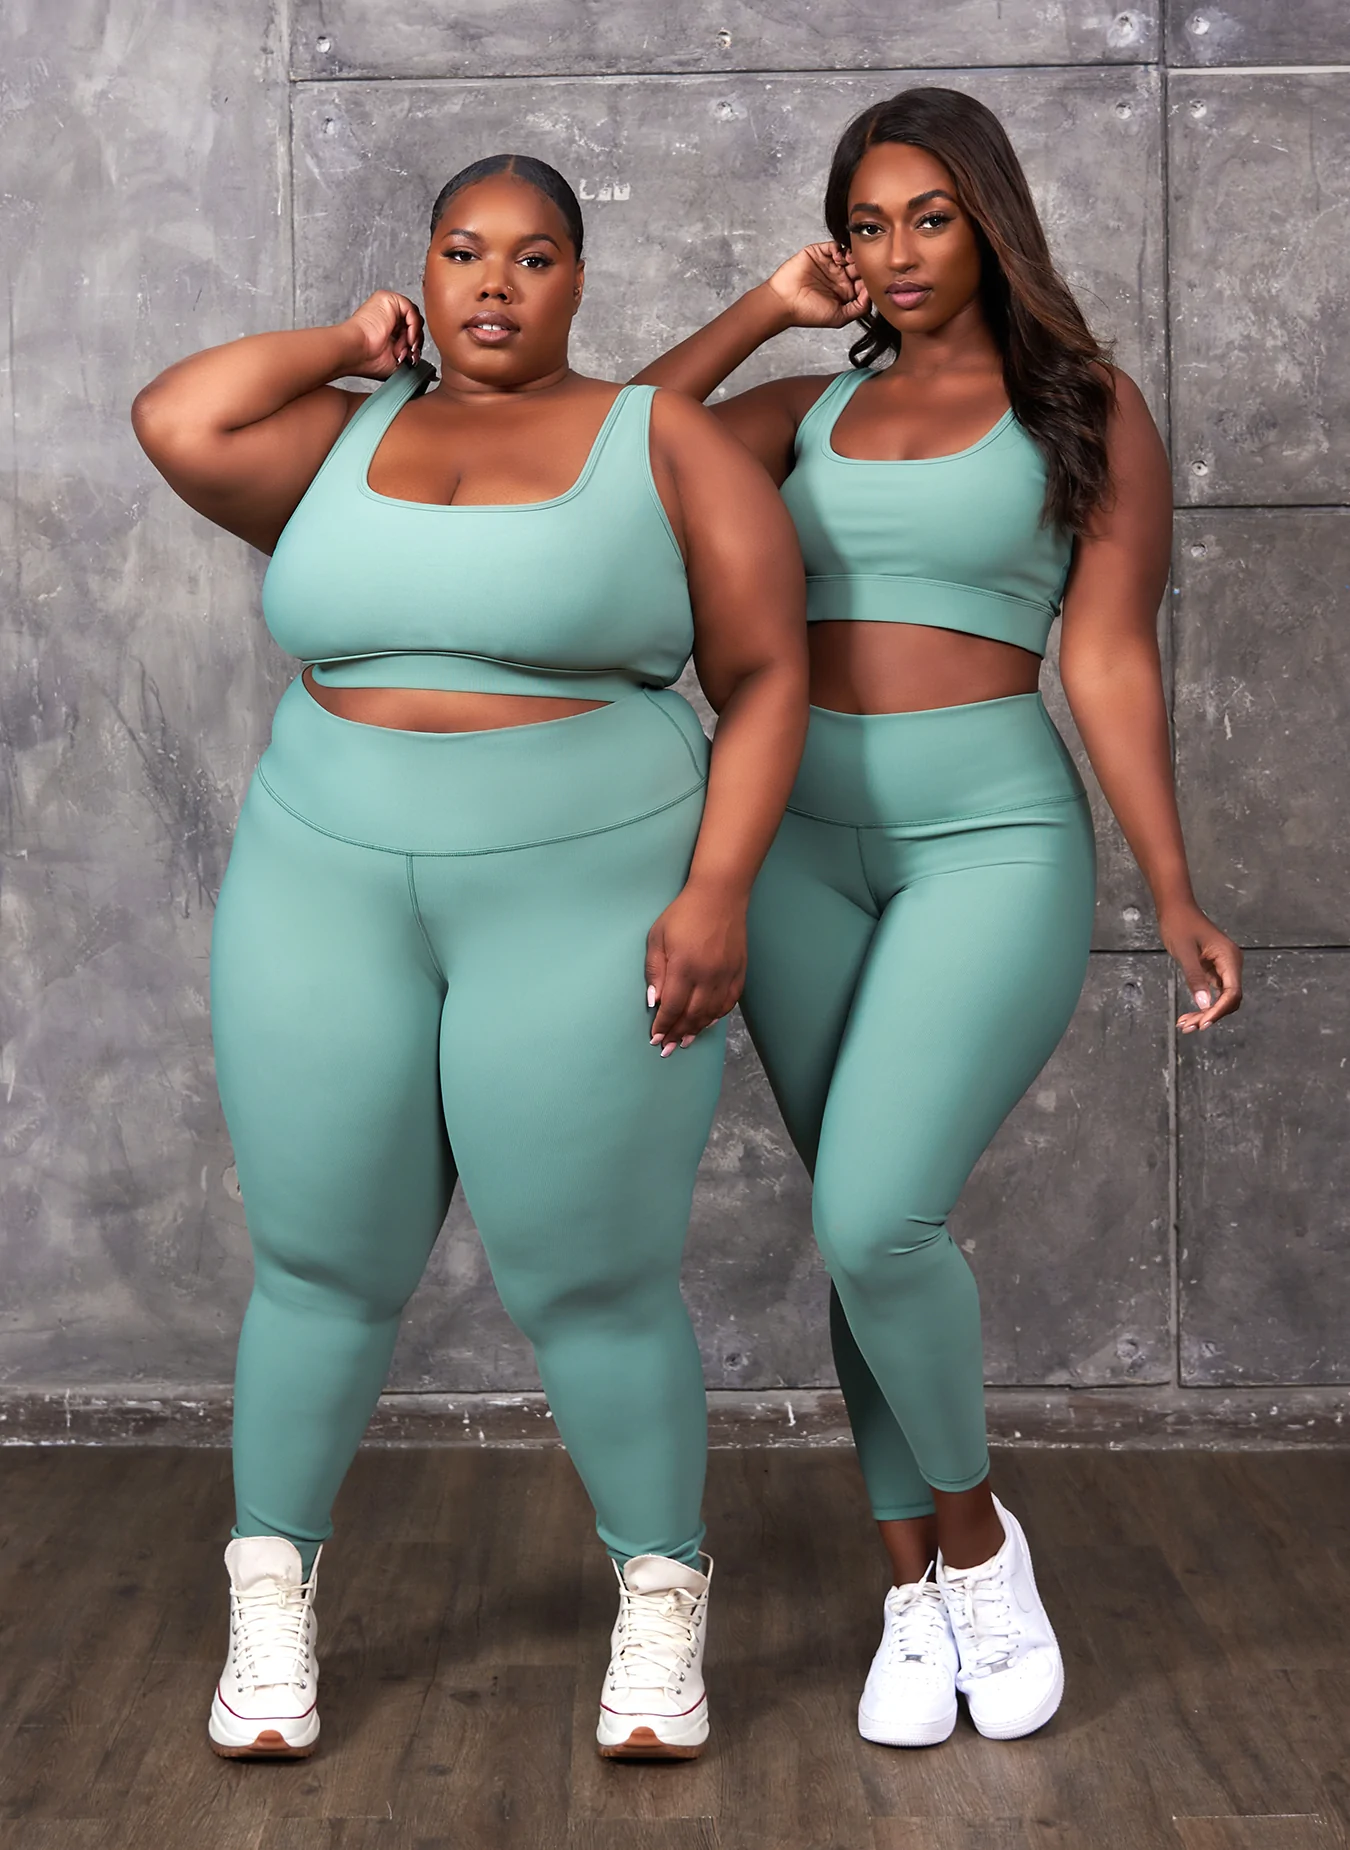 Our Favorite Picks from the Rebdolls Activewear Collection